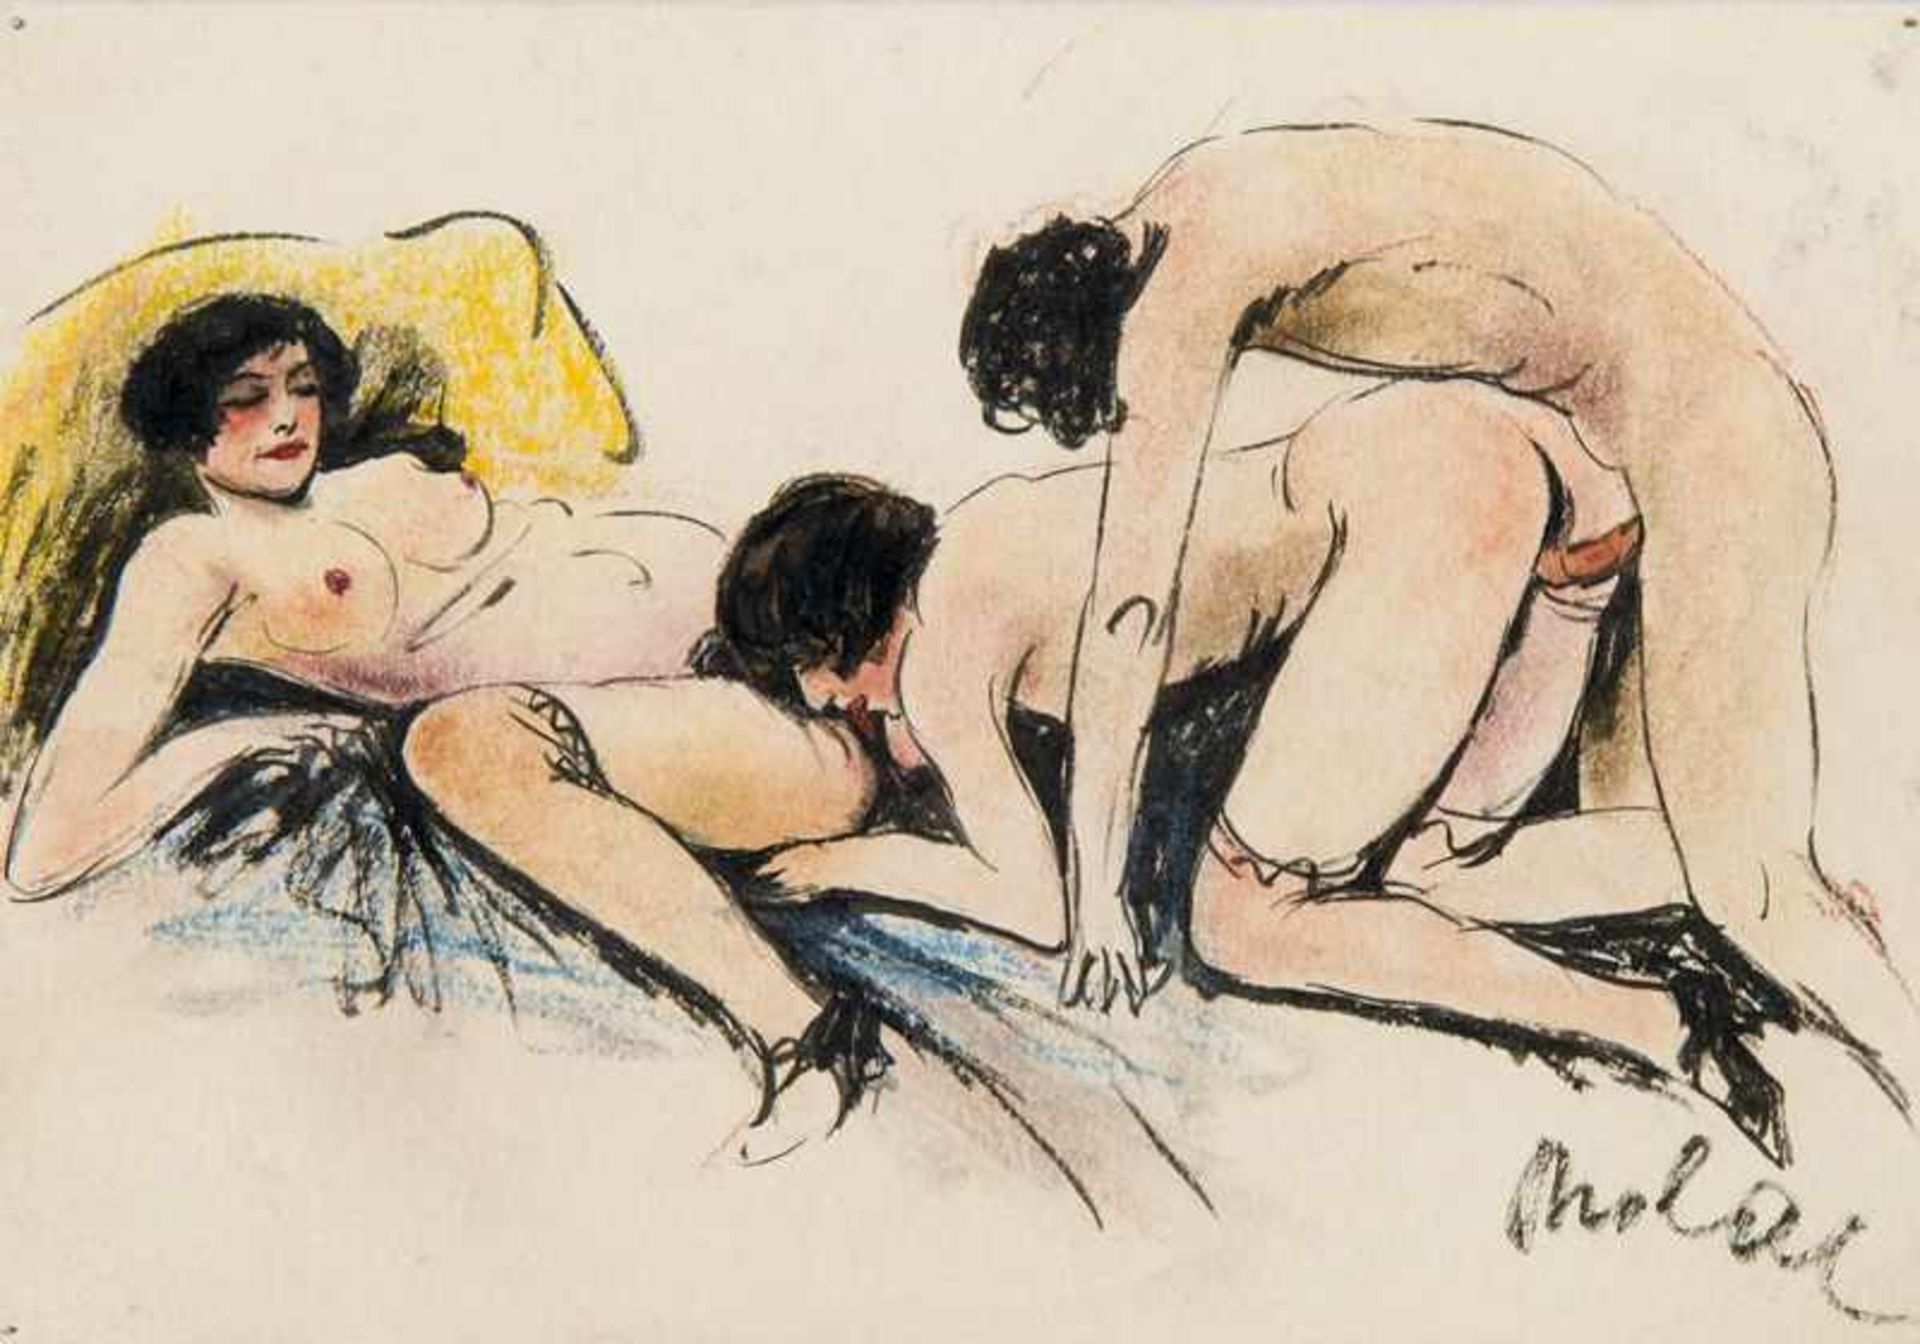 Explicit depictions of the erotic love play, which in layout and painting style are reminiscent of